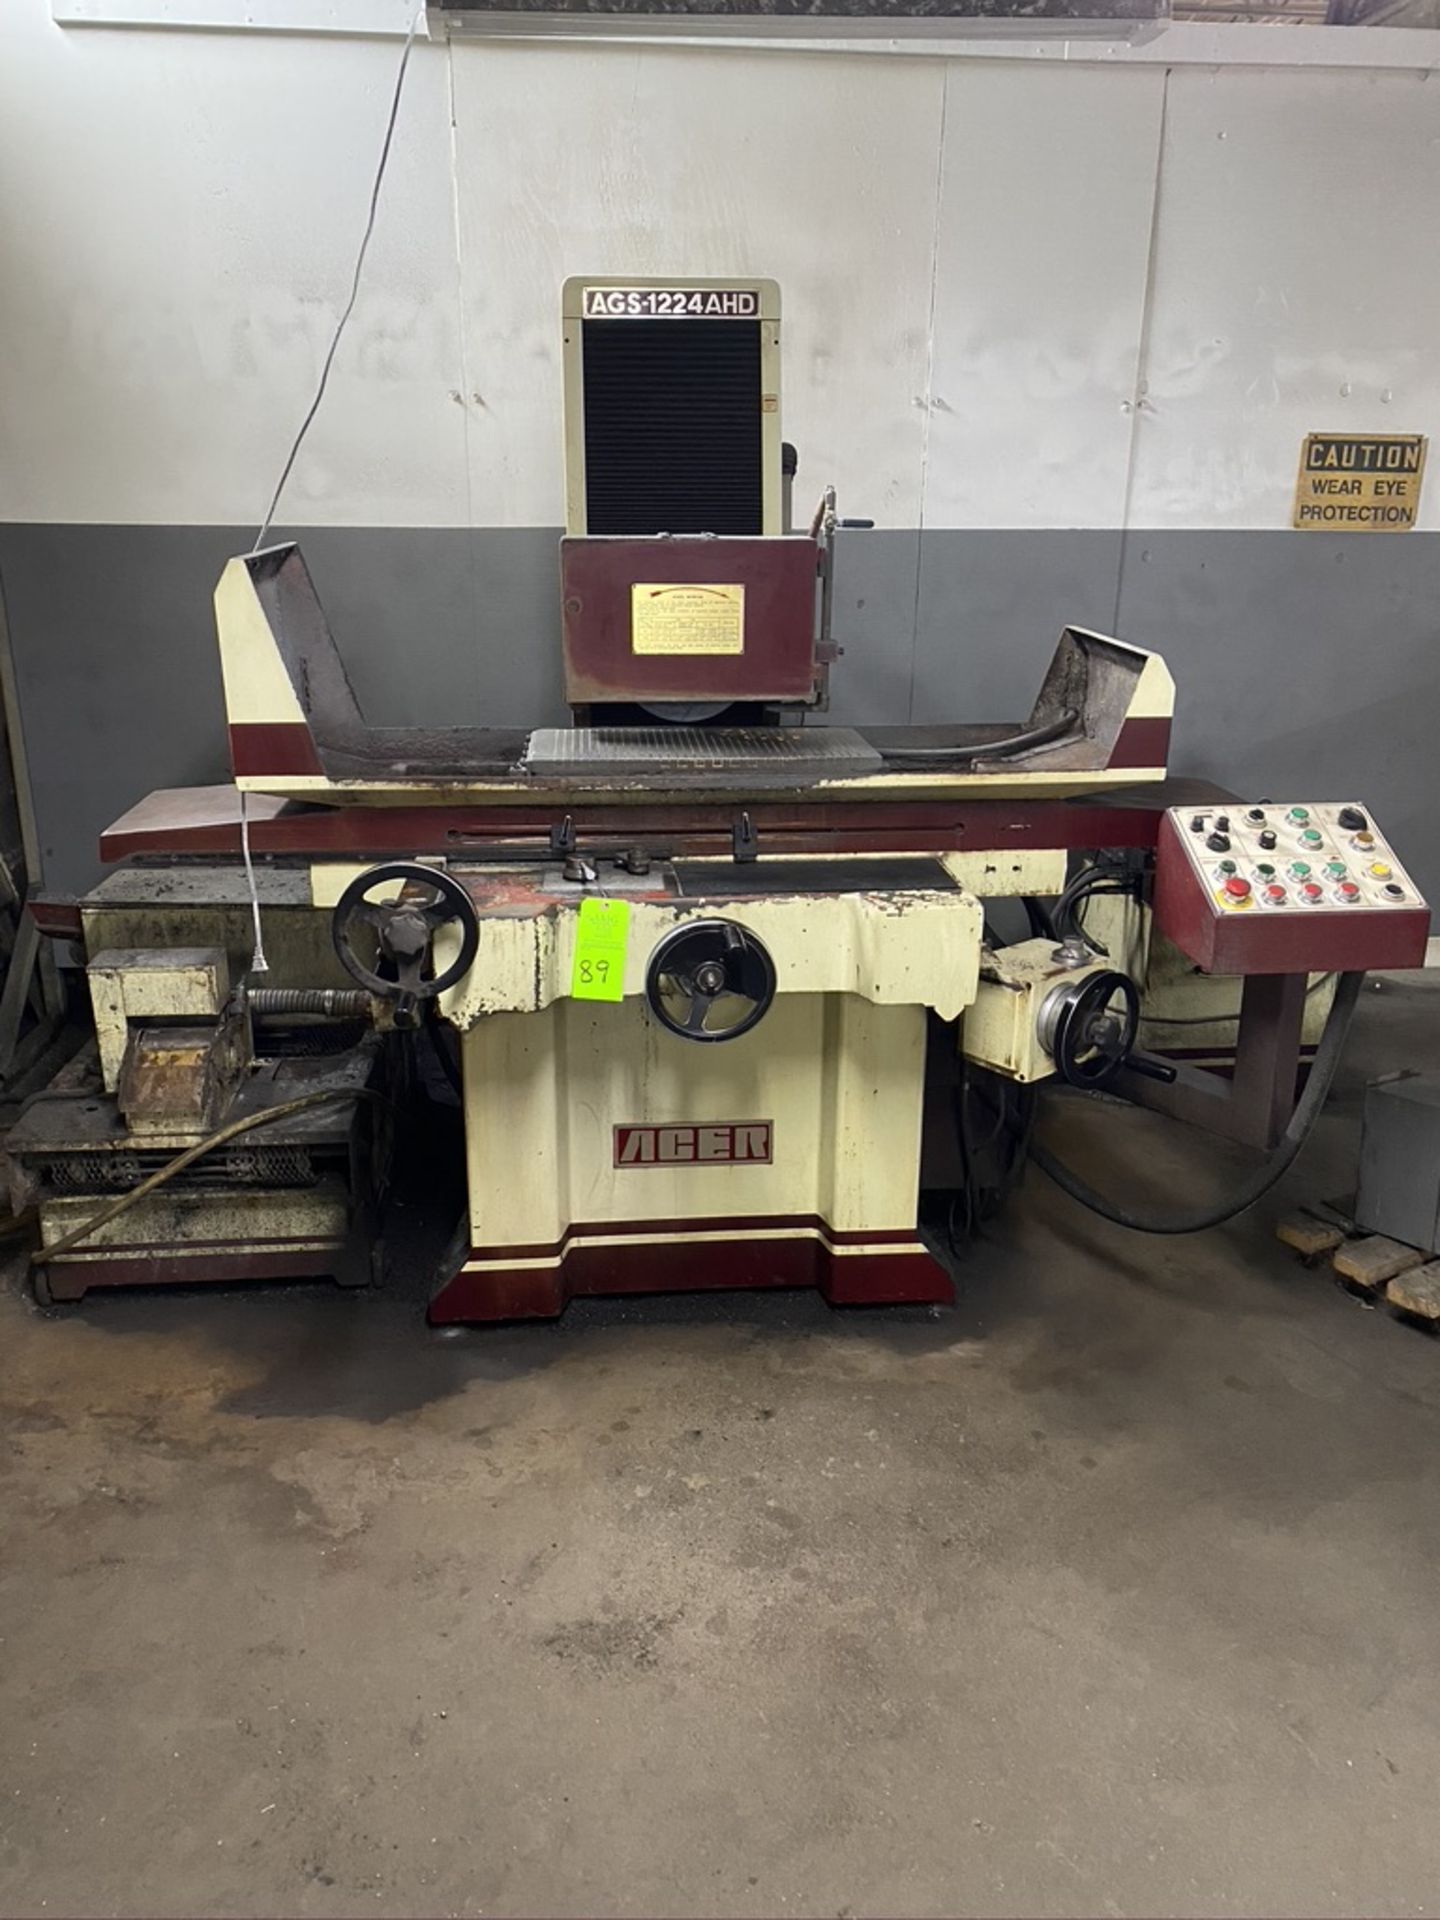 12" x 24" Acer model AGS-1224 AHD,Hydraulic surface grinder (2005)